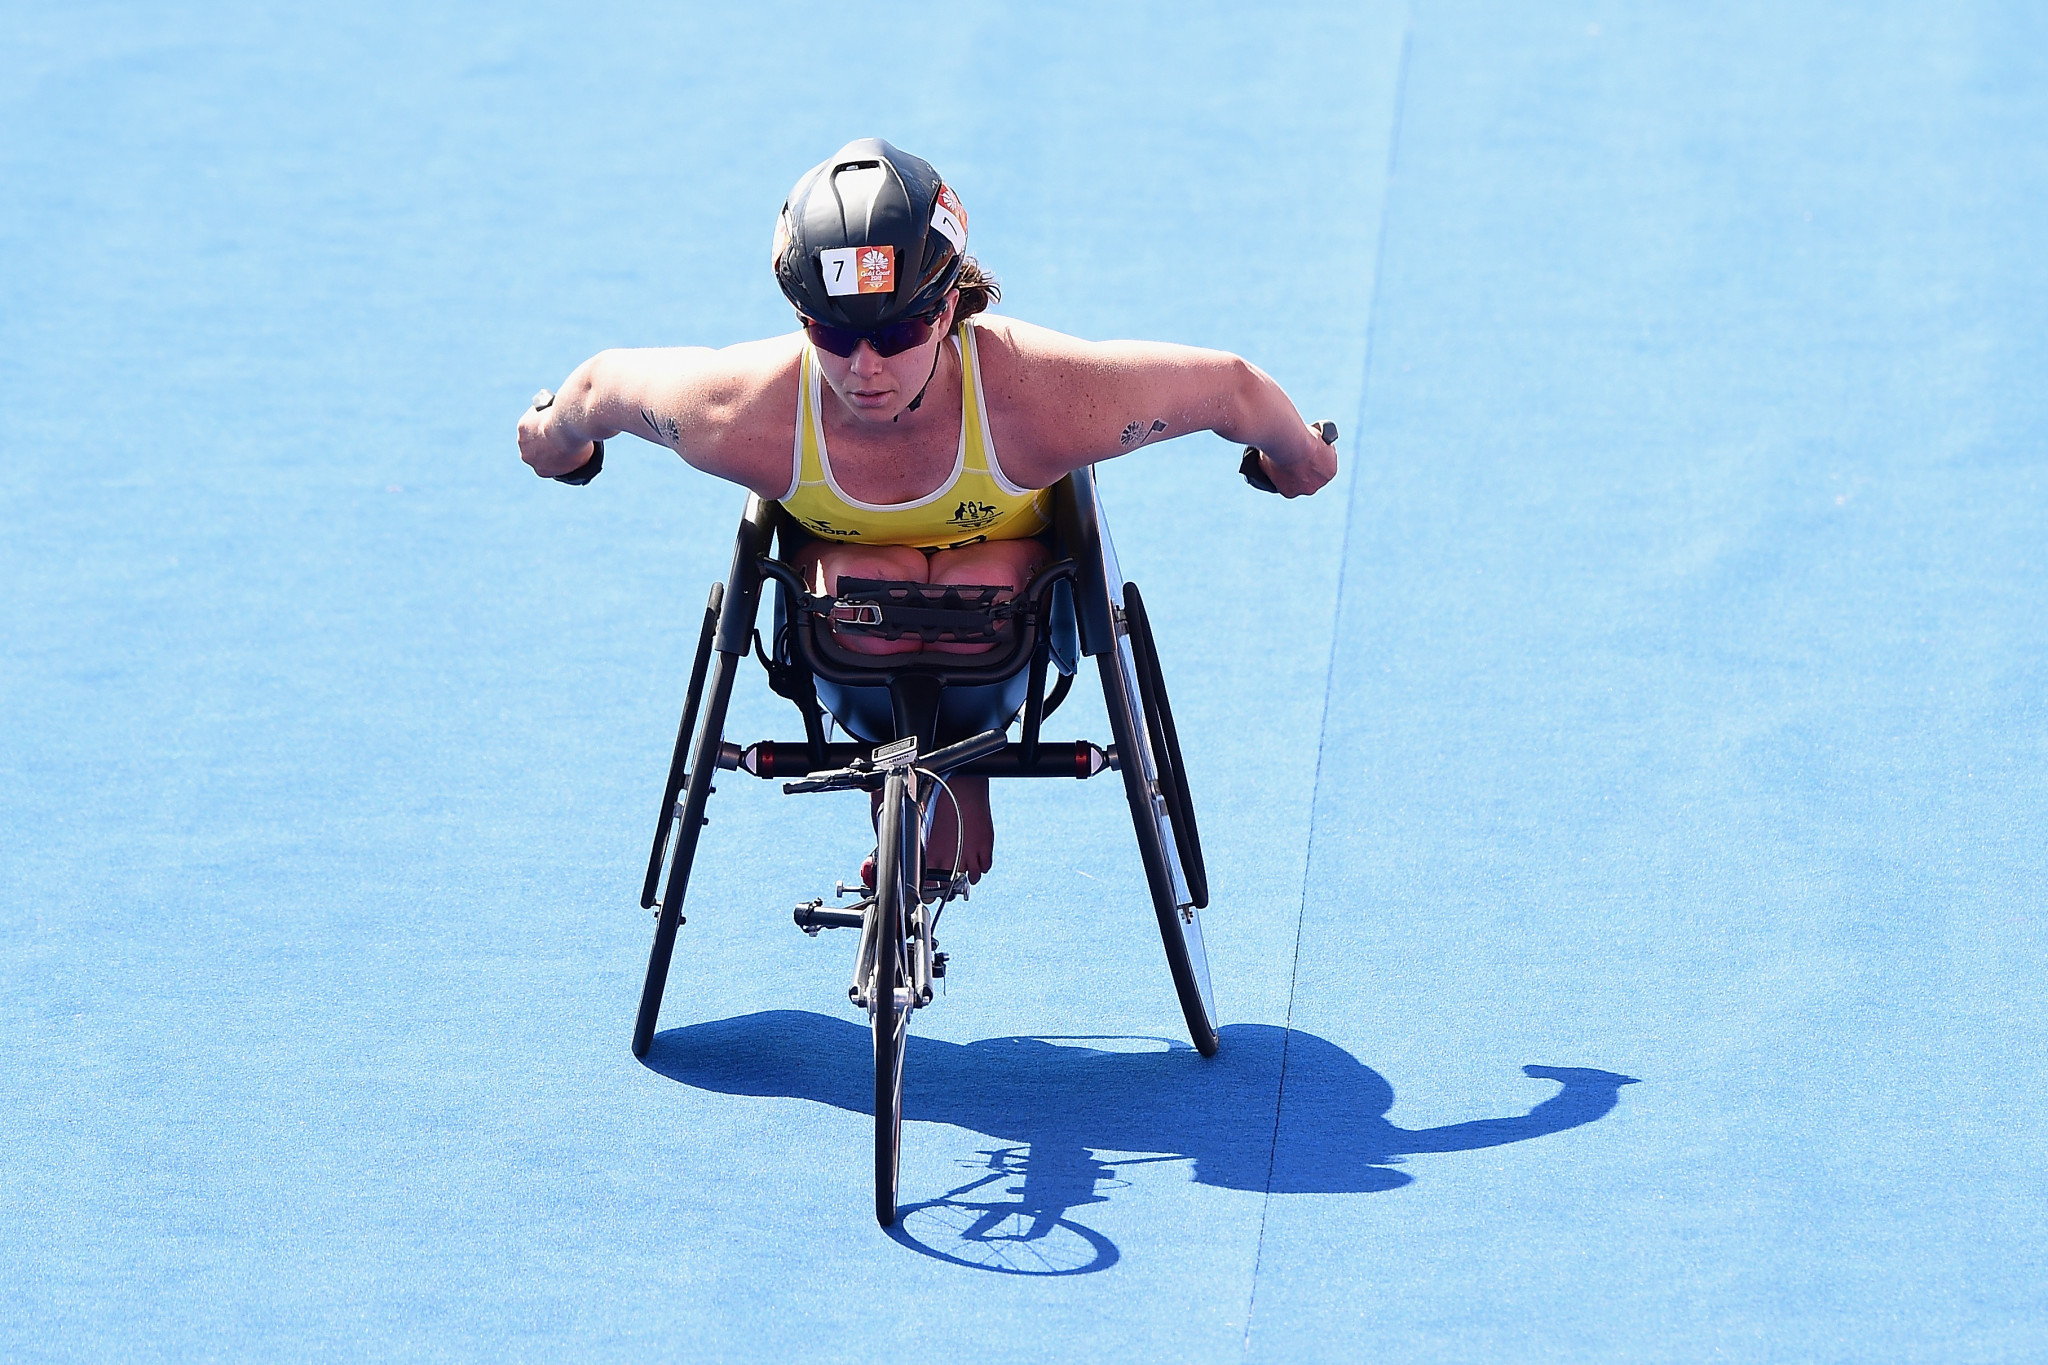 Tokyo 2020 qualification points at stake for Para-triathletes at Oceania Championships